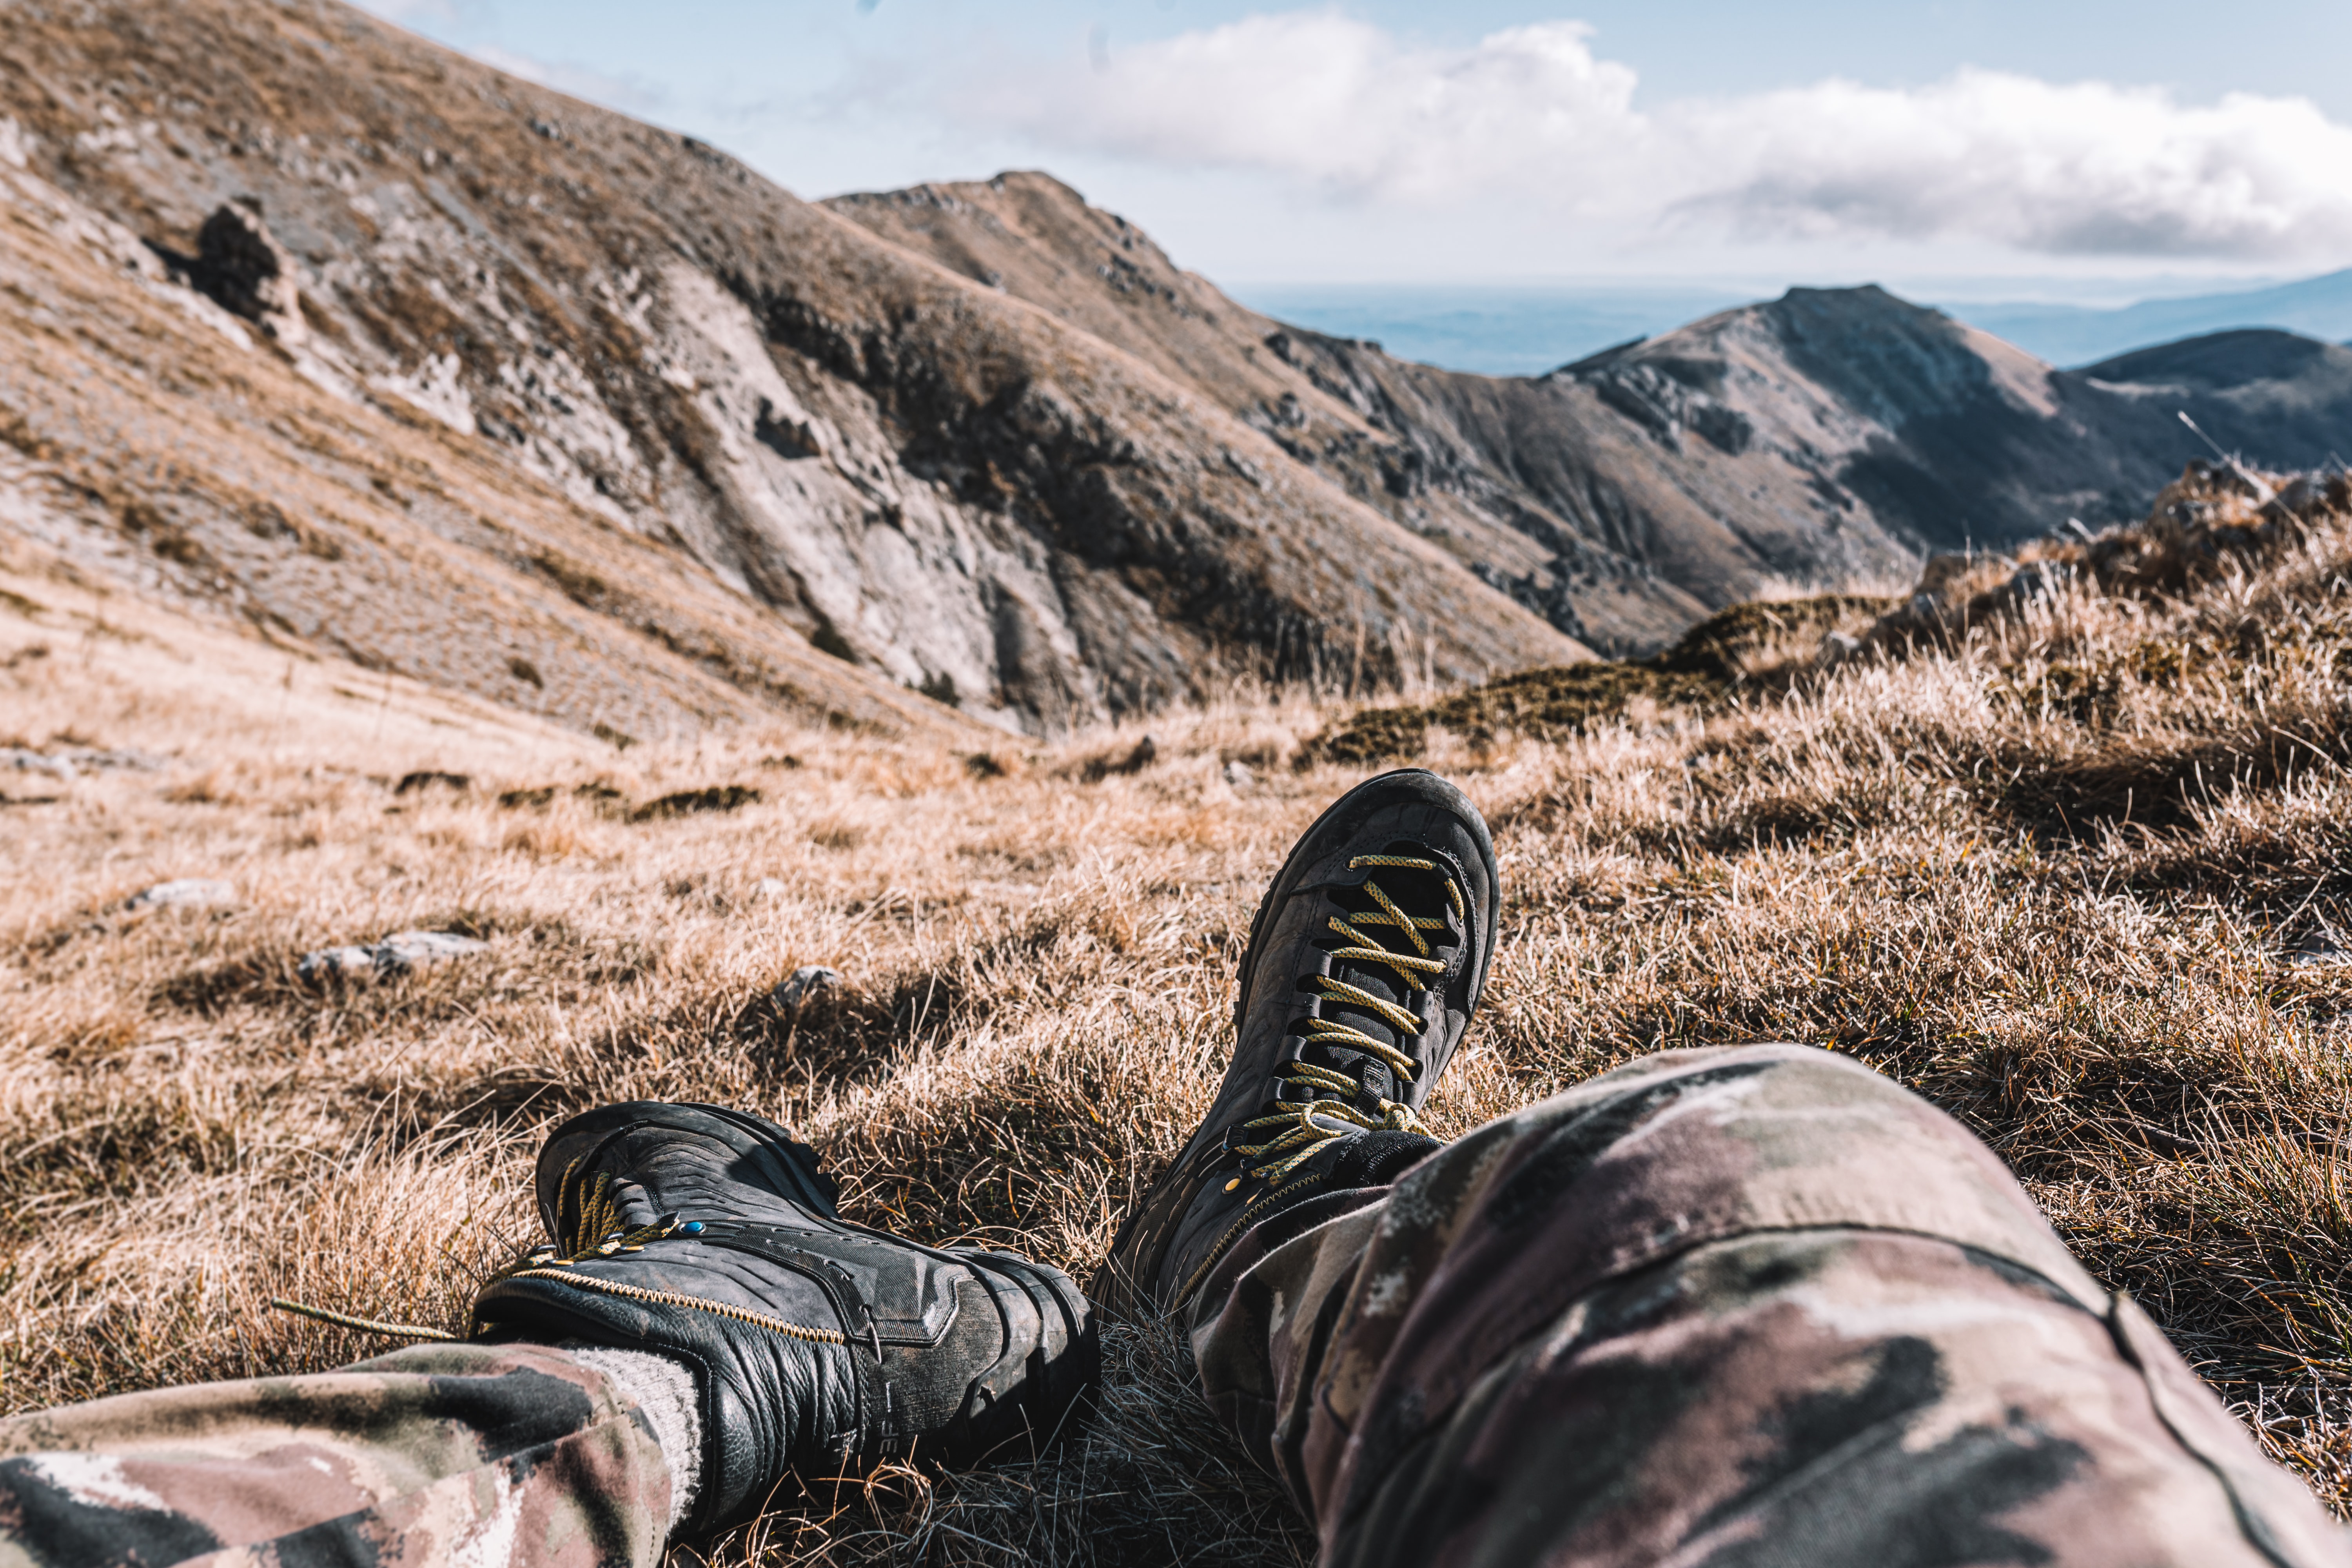 Hiking Boots or Shoes: Do I Really Need Hiking Boots? 